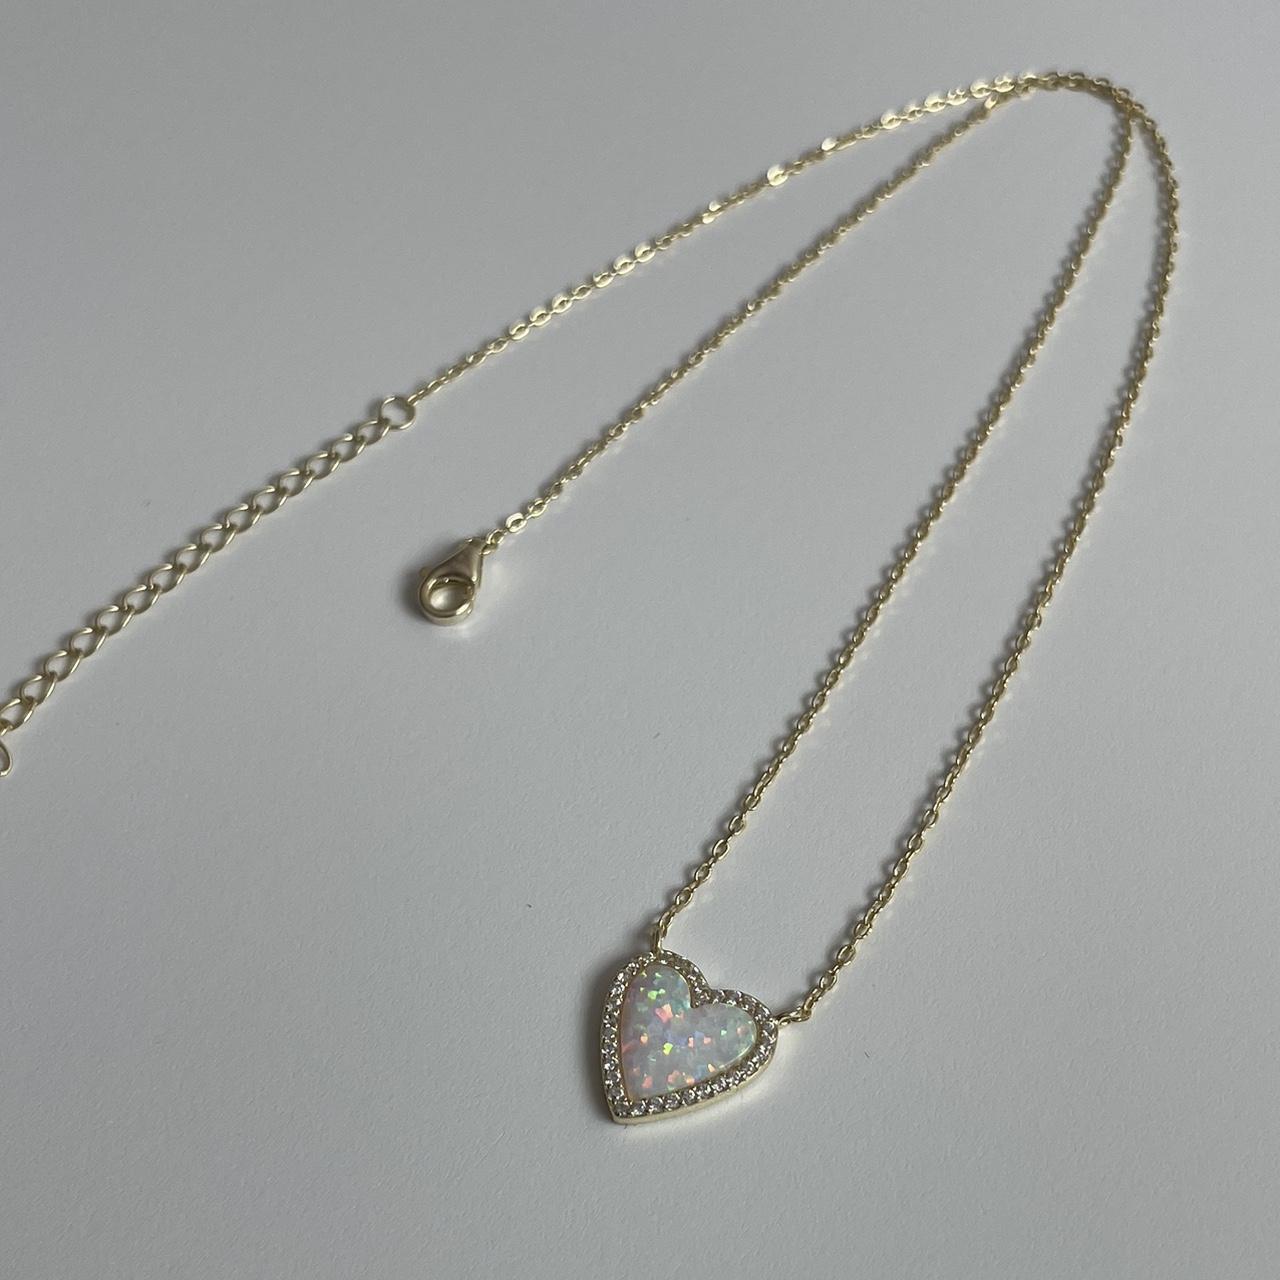 necklace with small crystals